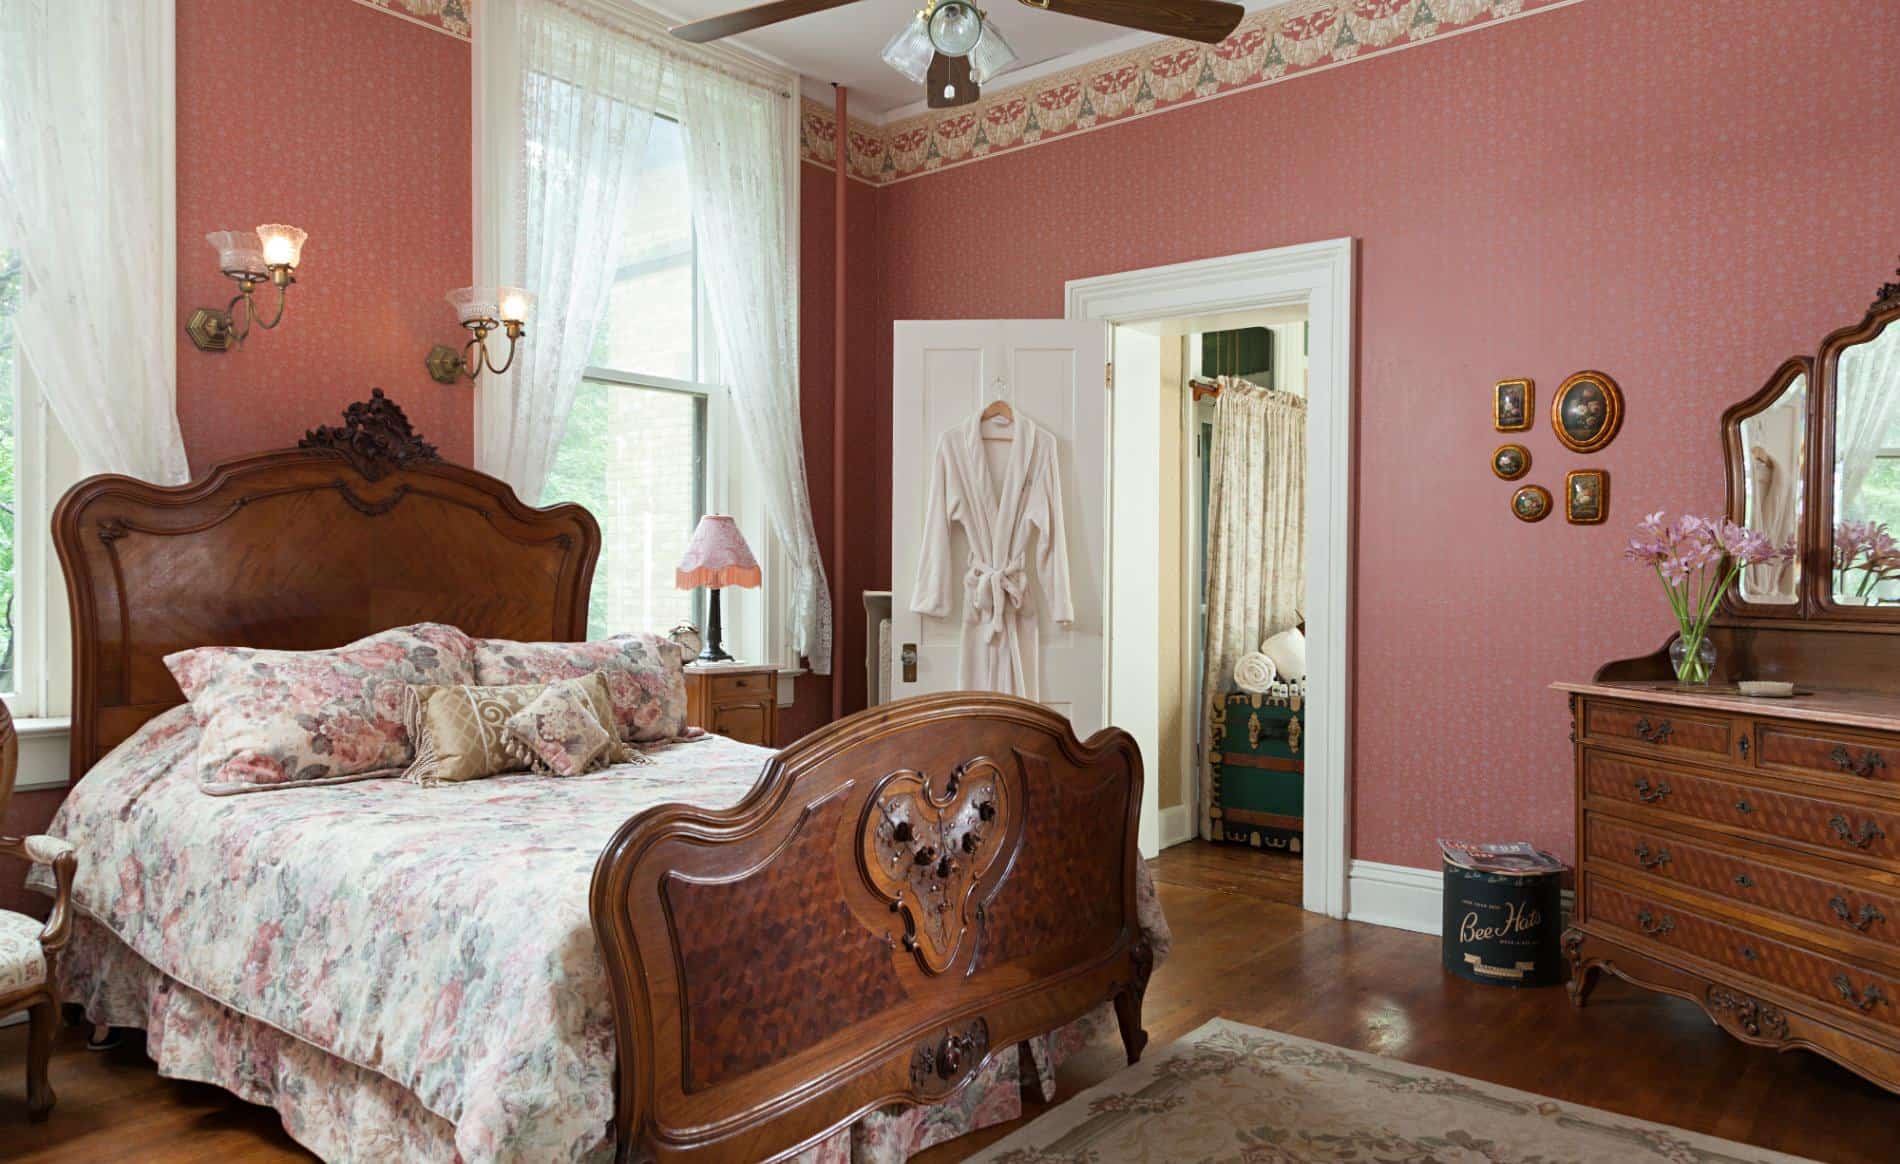 Rose papered walls, white lace curtains, white trim and doors, wood floors and elegant carved bed and dresser with mirror